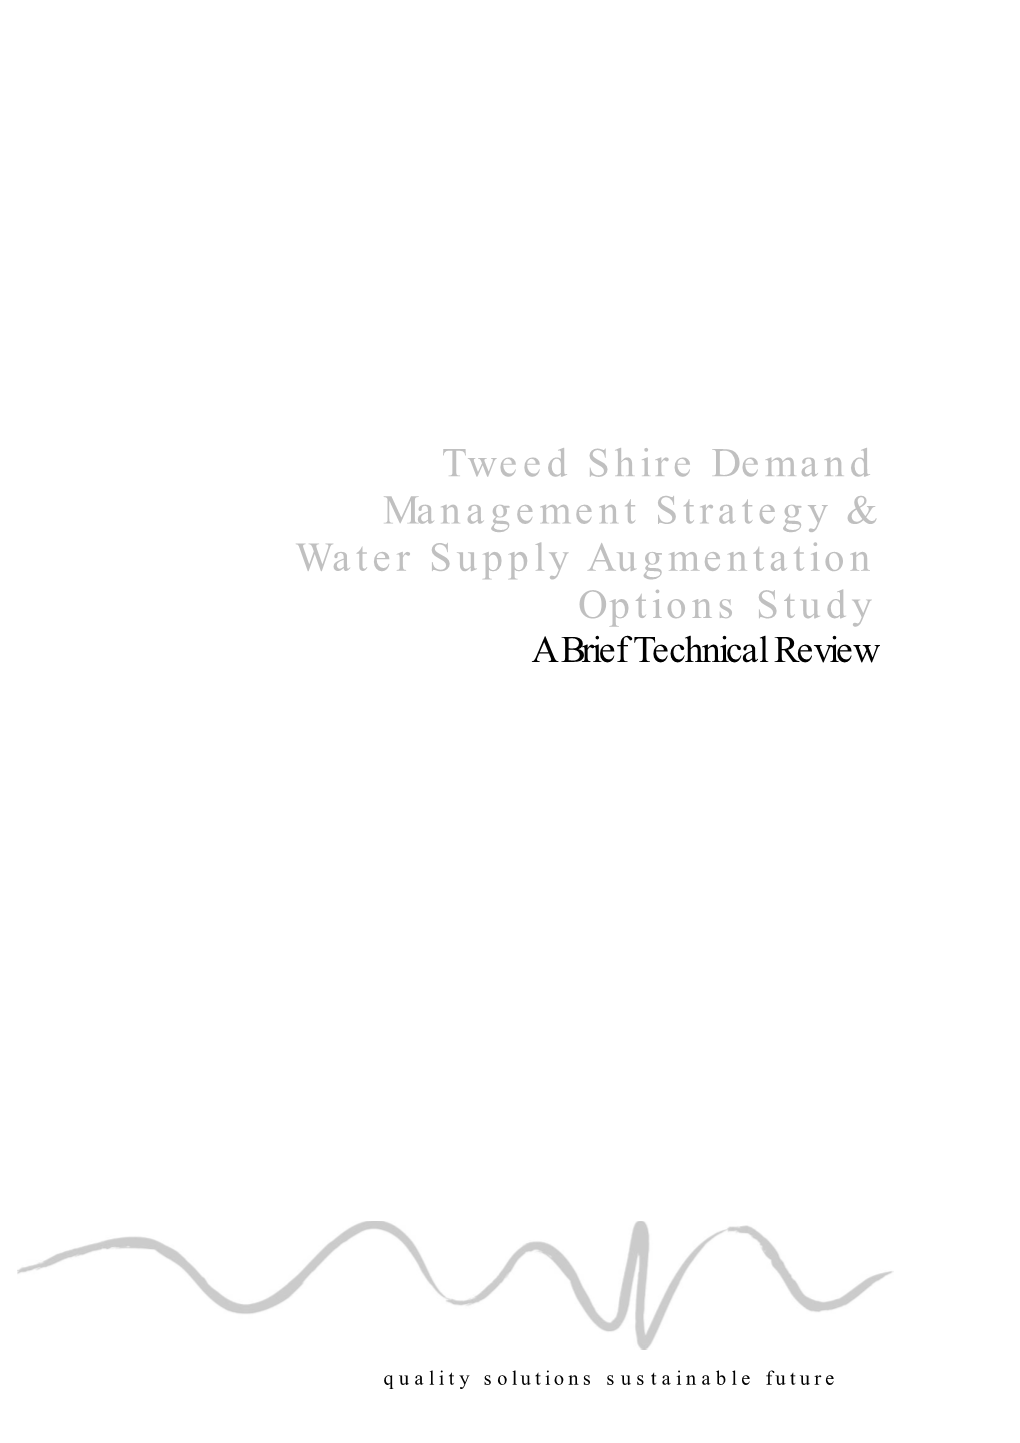 Tweed Shire Demand Management Strategy & Water Supply